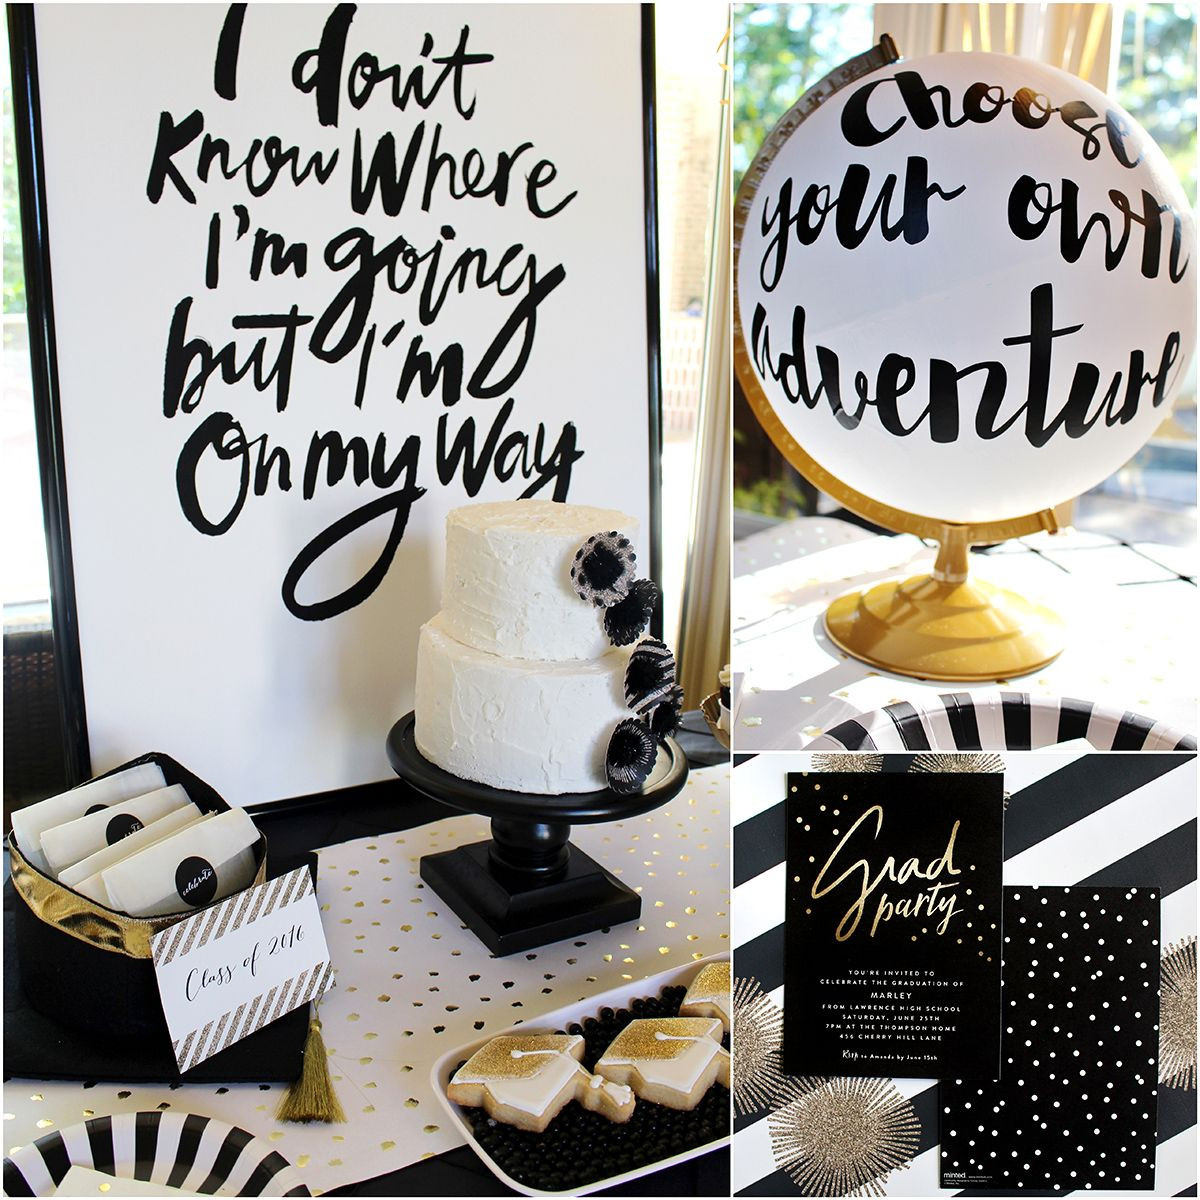 College Graduation Party Themes And Ideas
 Pin by Janet Ridings on Graduation Open House